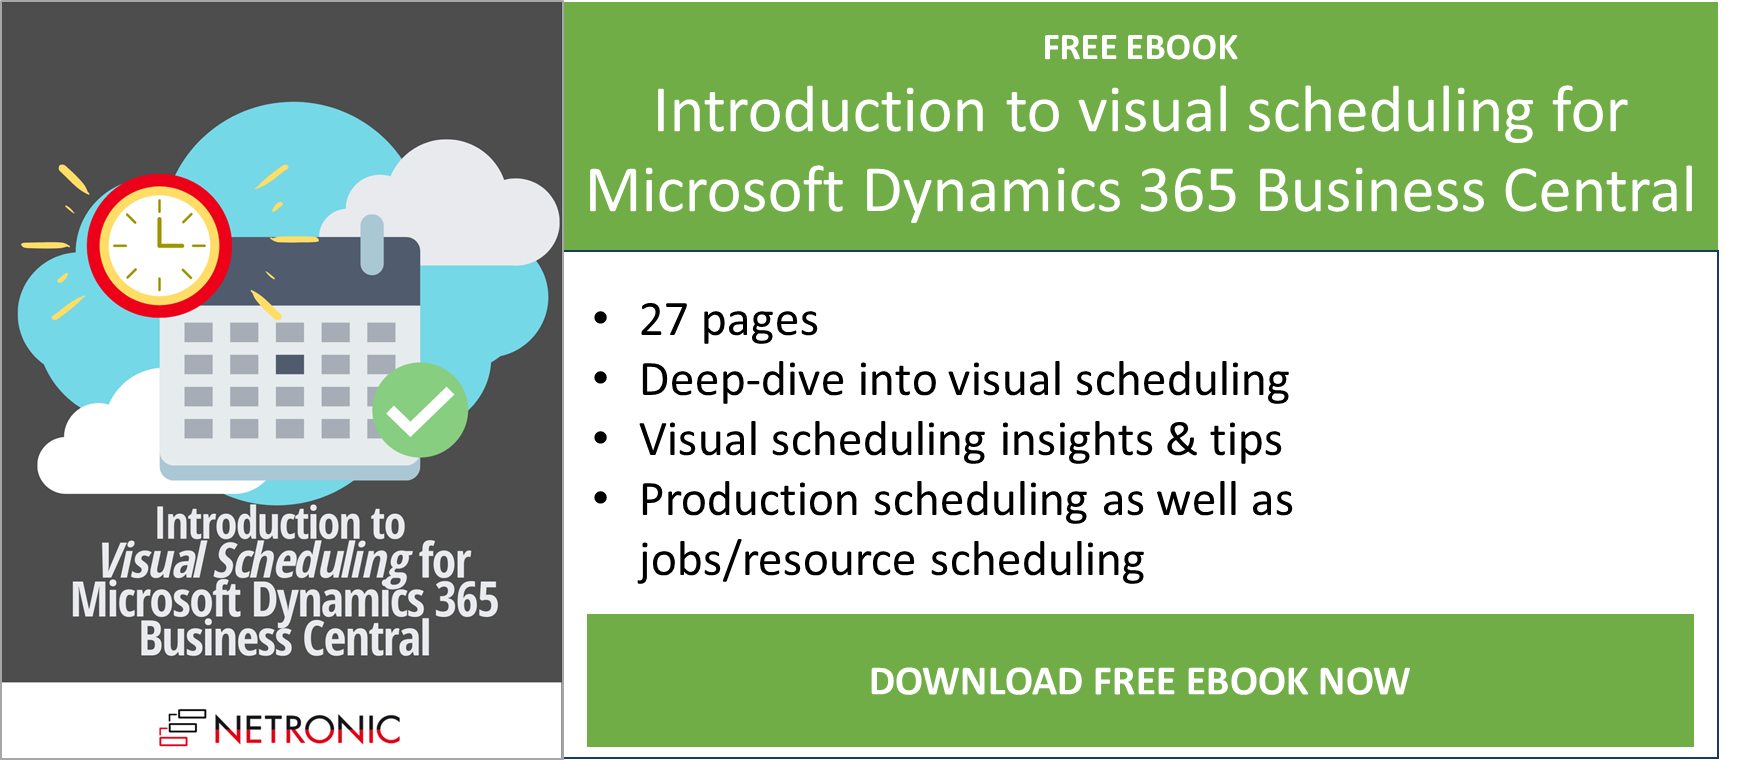 Ebook - Visual Scheduling for Microsoft Dynamics 365 Business Central